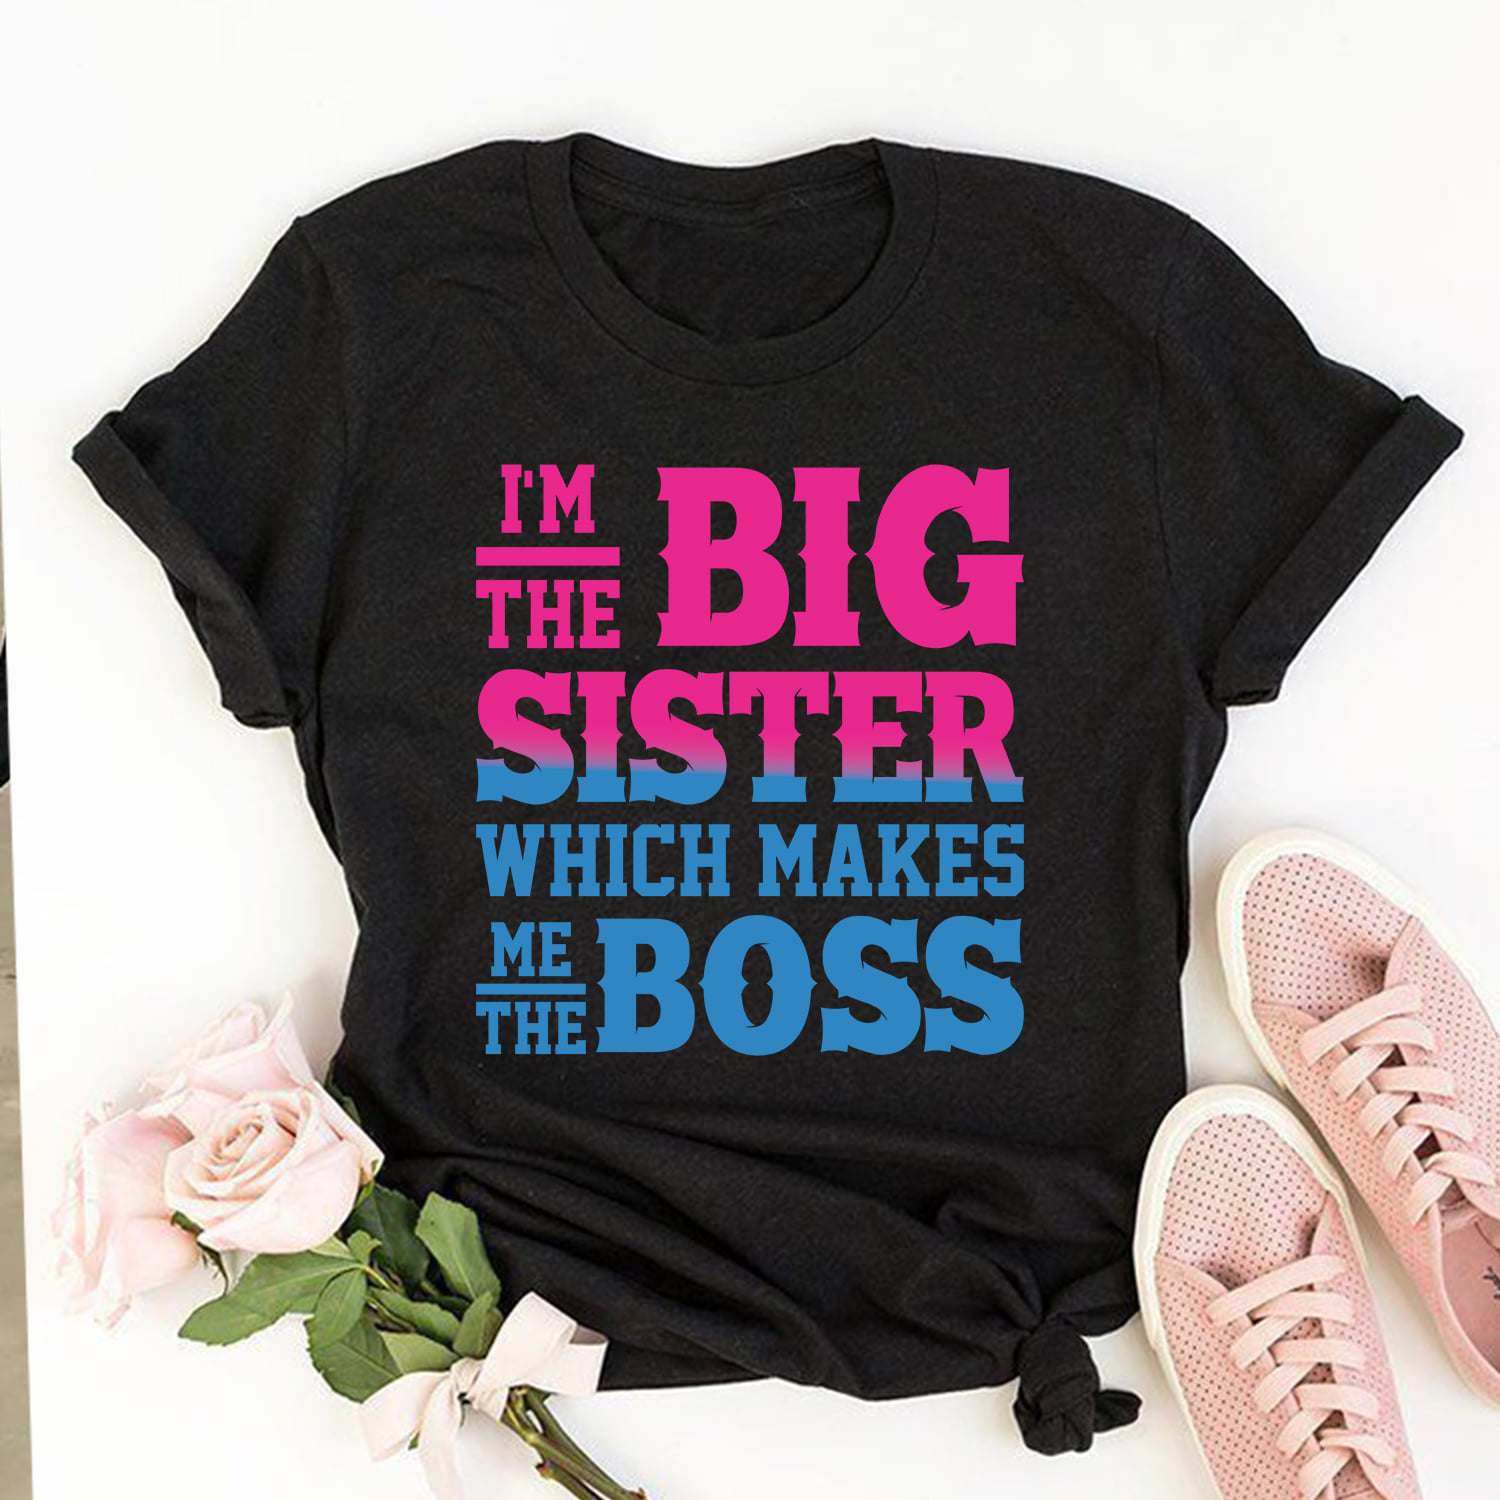 I'm the big sister which make me the boss